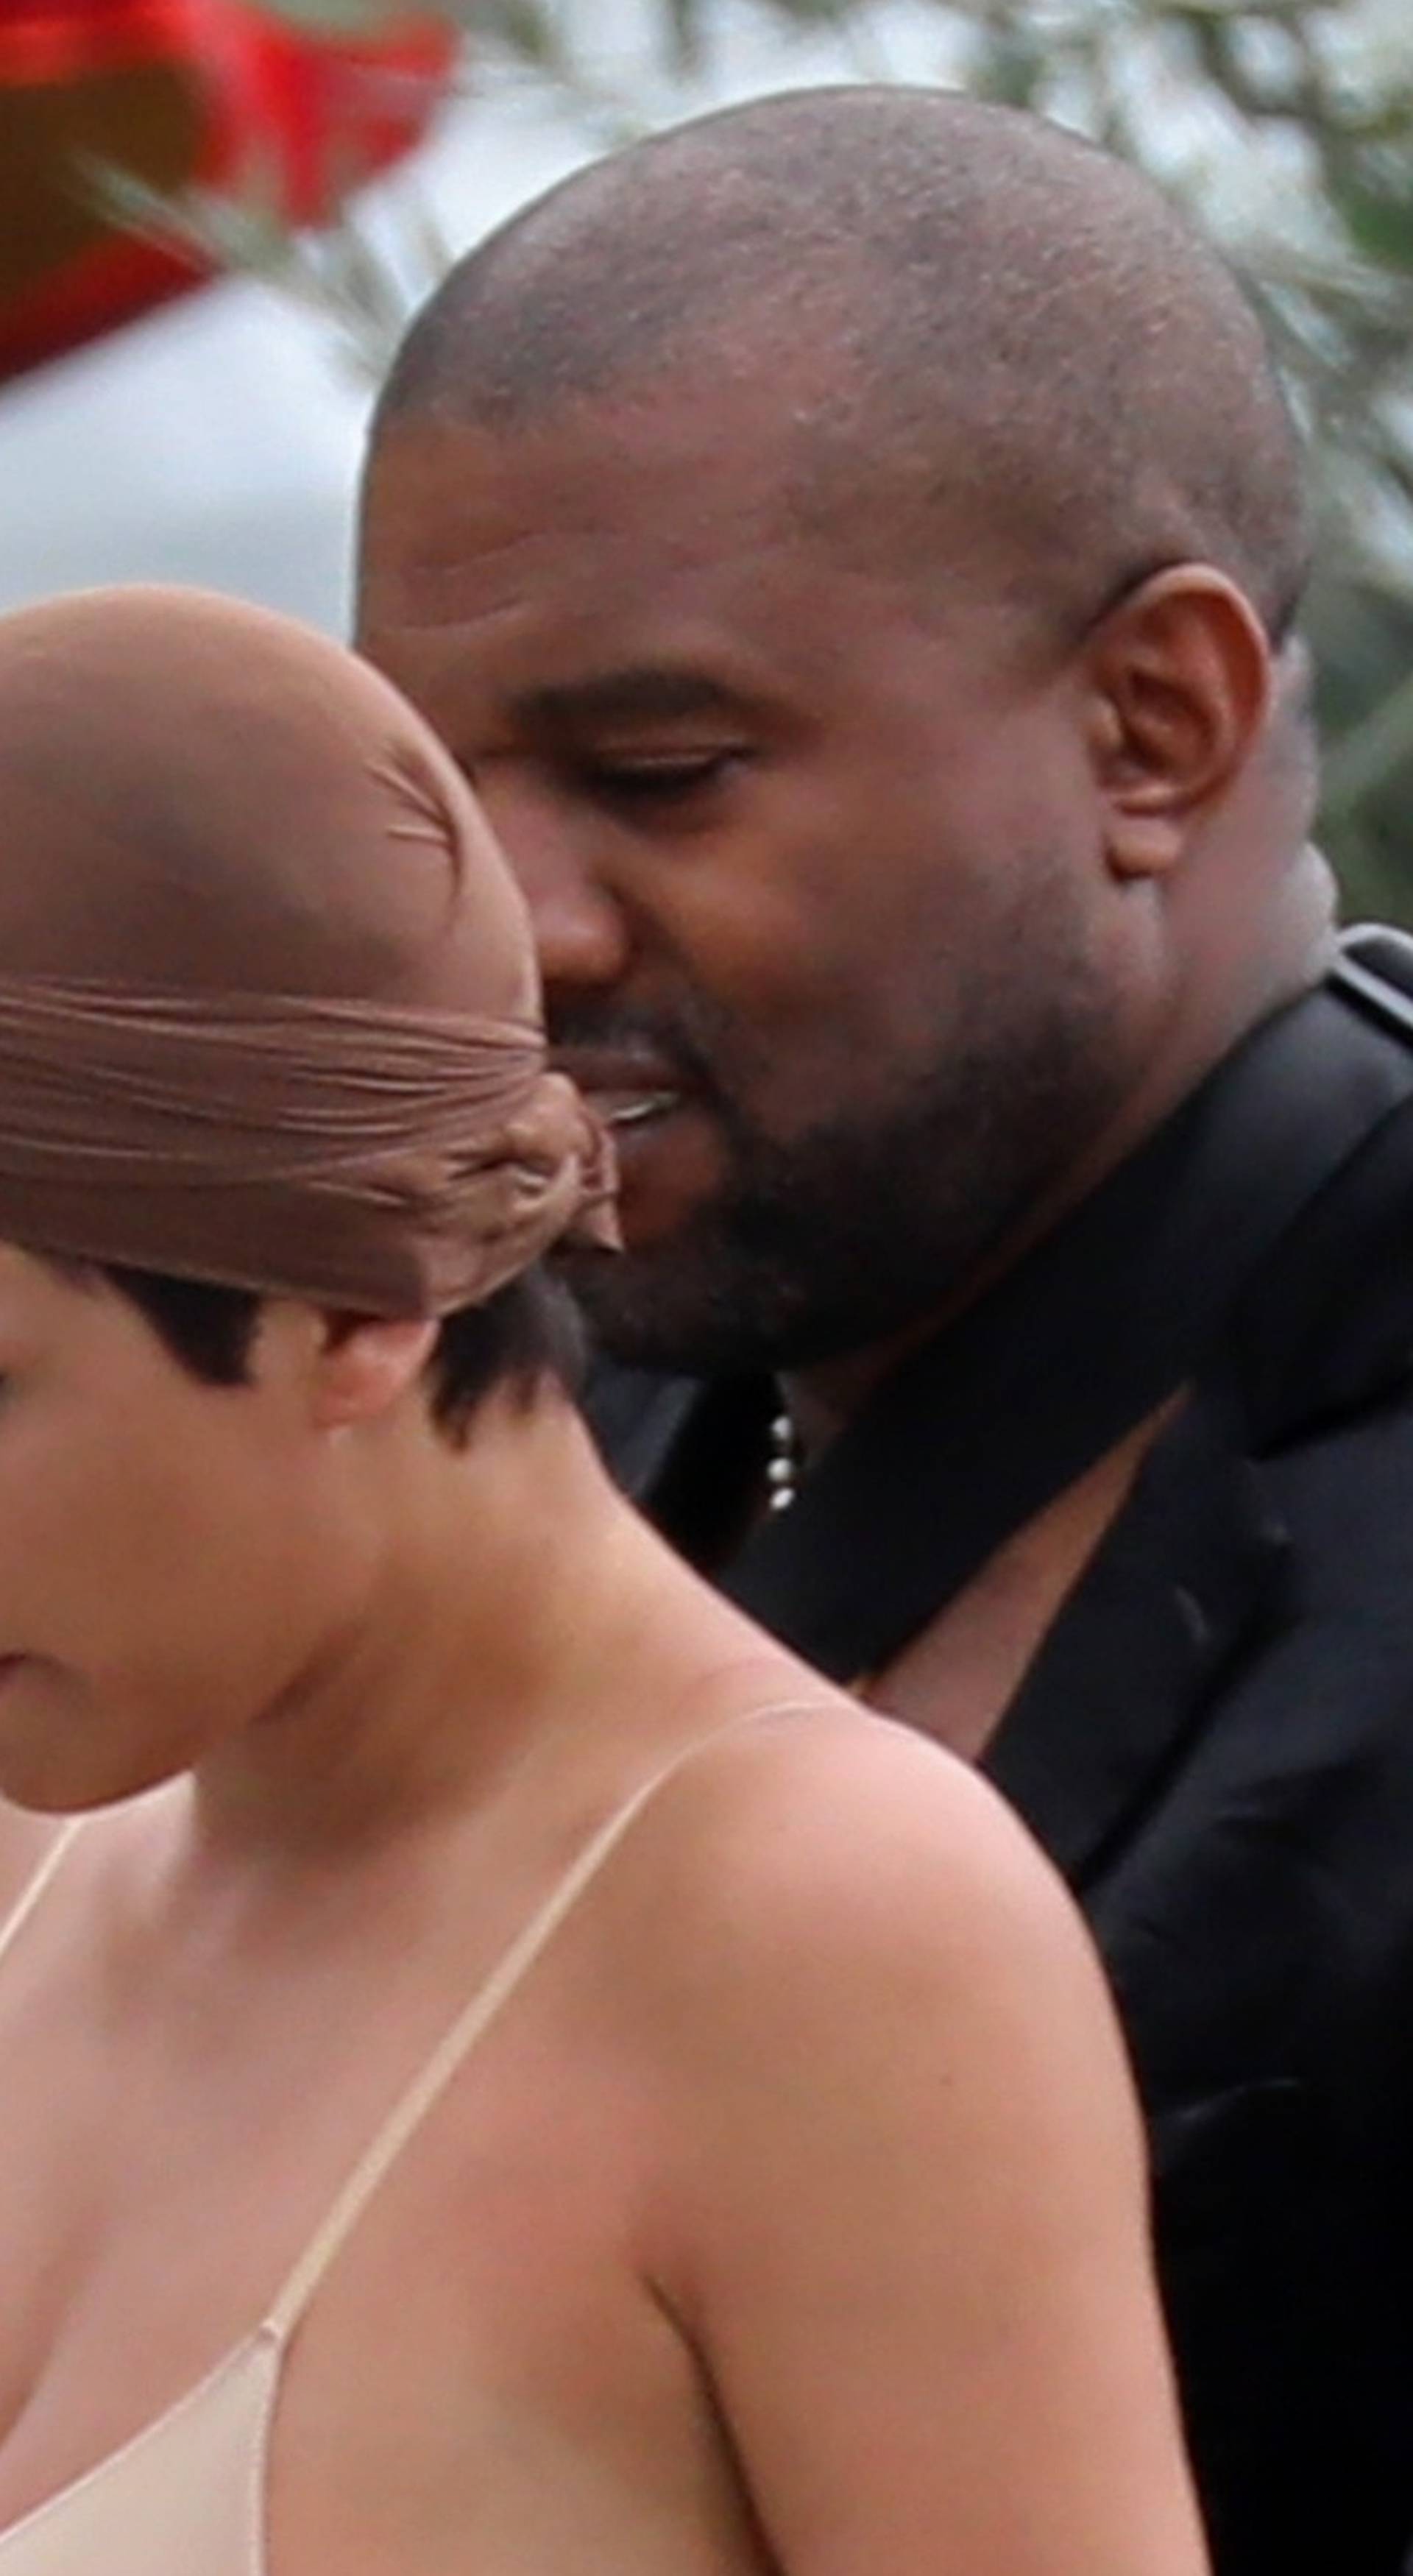 *PREMIUM-EXCLUSIVE* *MUST CALL FOR PRICING* Controversial rapper Kanye West is seen with his wife Bianca Censori who rocks a see-through outfit while out in Tuscany.